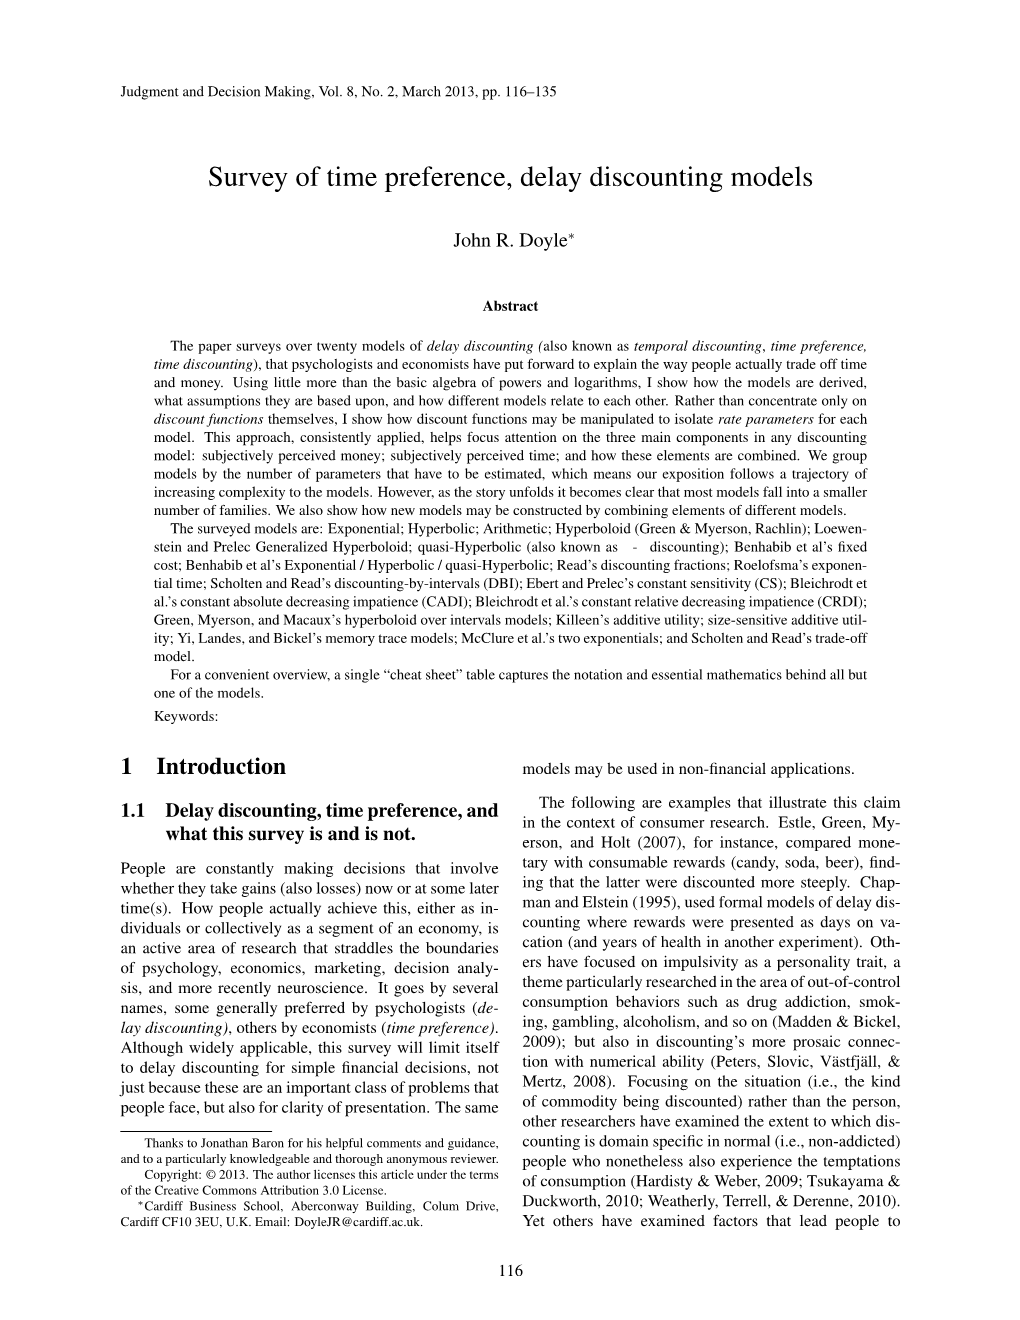 Survey of Time Preference, Delay Discounting Models